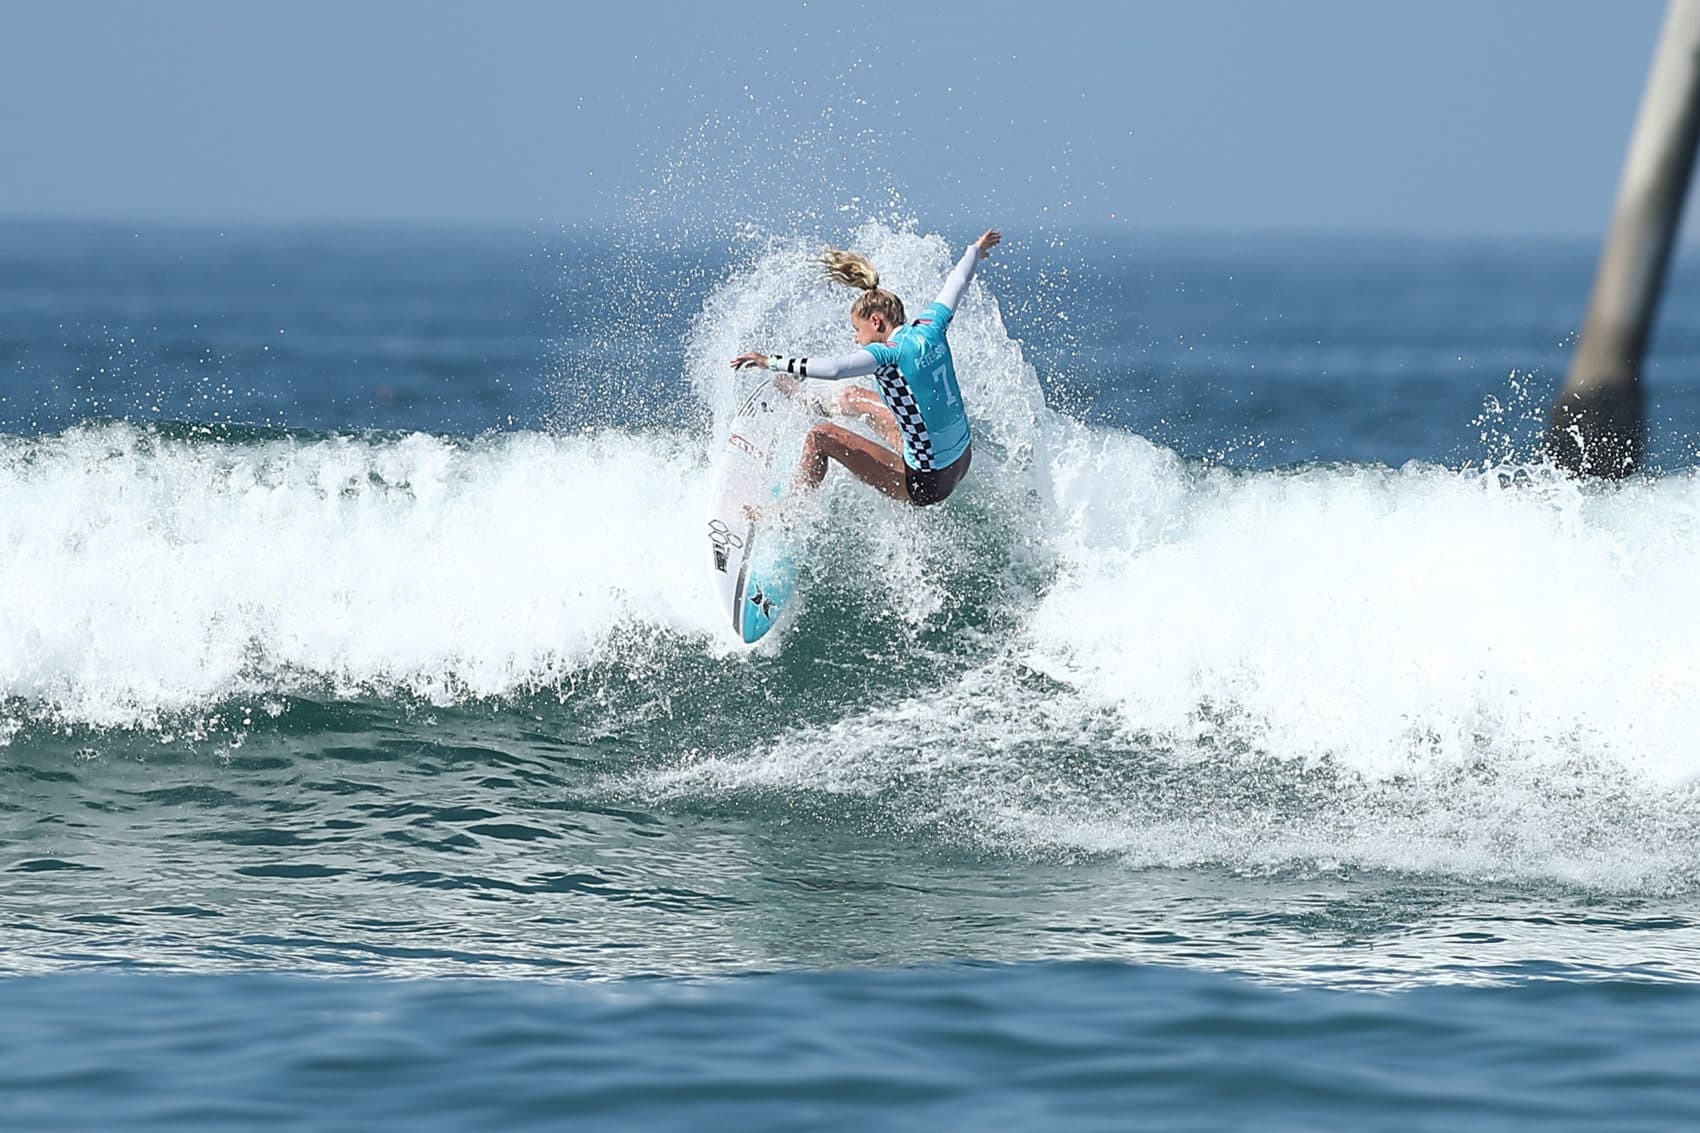 A surfer competes in the women's quarterfinals at the Vans U.S. Open of Surfing on Aug. 5, 2018 in Huntington Beach, California. Women competing at the highest levels of surfing will now win the same prize money as their male counterparts after a rules change took effect earlier this month. (Joe Scarnici/Getty Images)